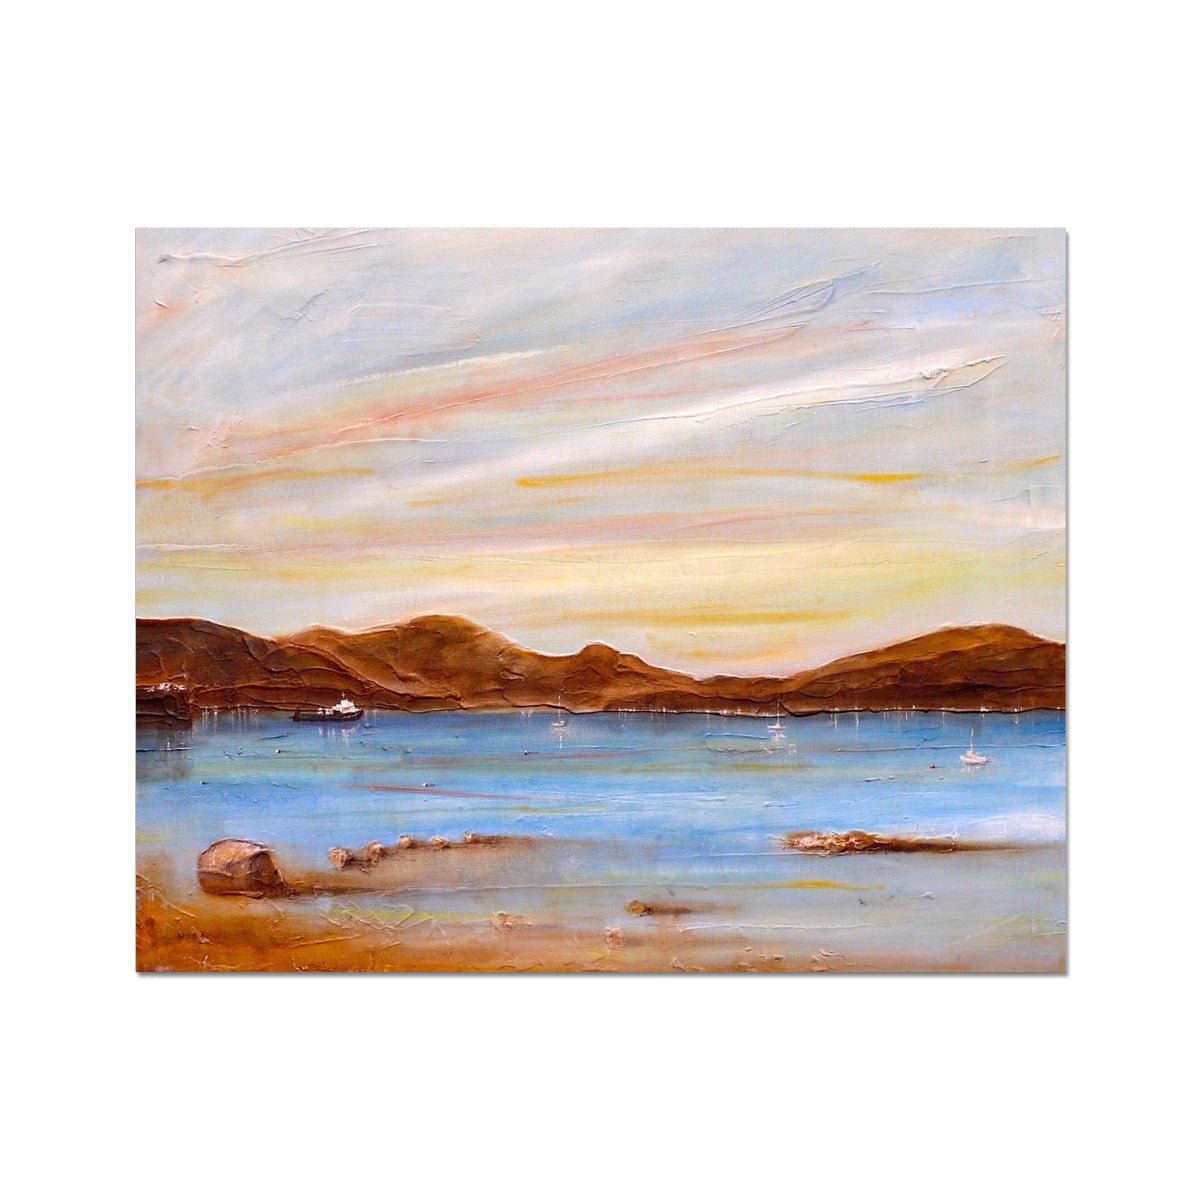 The Last Ferry To Dunoon Painting | Artist Proof Collector Prints From Scotland-Artist Proof Collector Prints-River Clyde Art Gallery-20"x16"-Paintings, Prints, Homeware, Art Gifts From Scotland By Scottish Artist Kevin Hunter